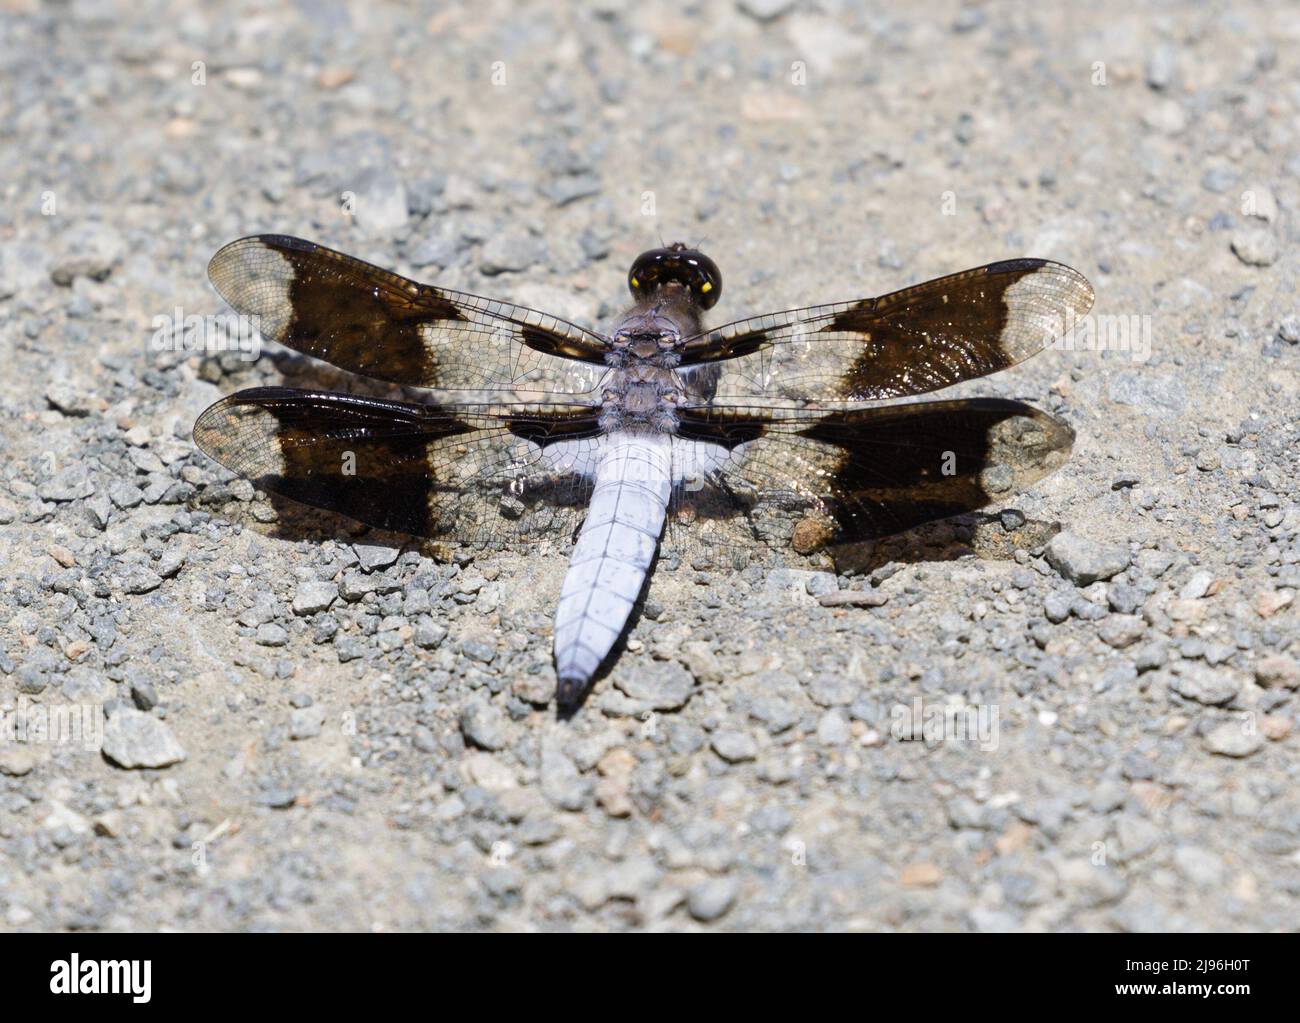 Common whitetail dragonfly adult male perched on trail. Foothills Park, Santa Clara County, California, USA. Stock Photo